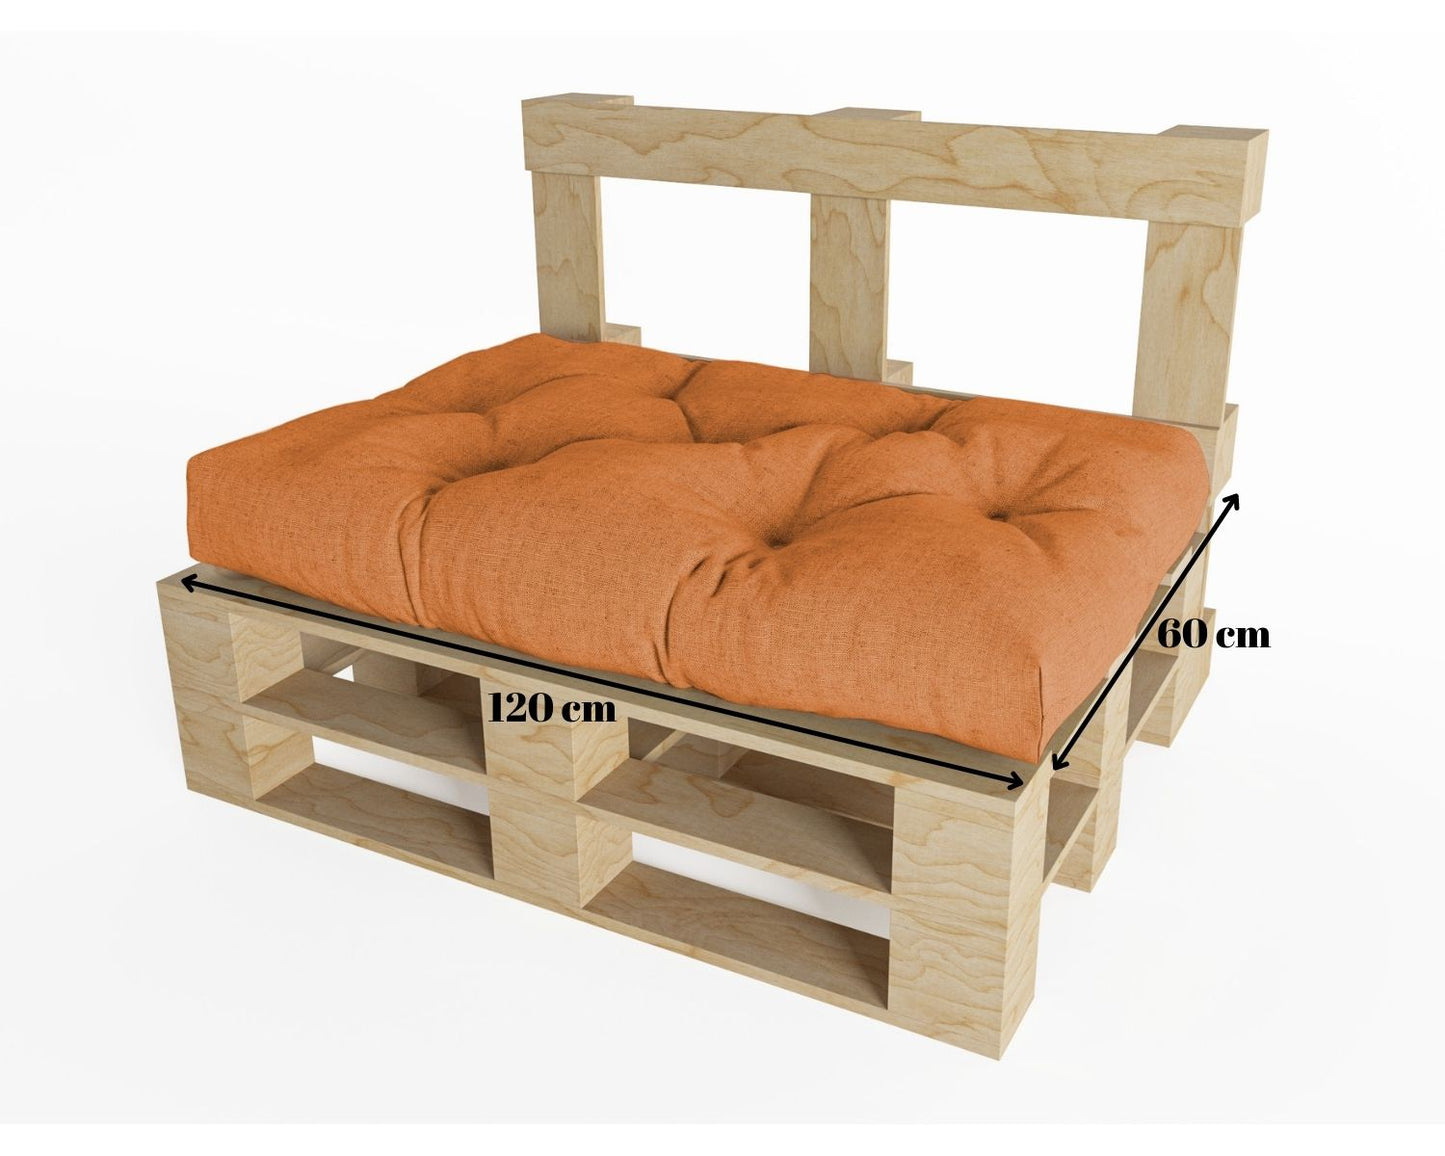 Pallet cushions Pallet pads for pallet furniture